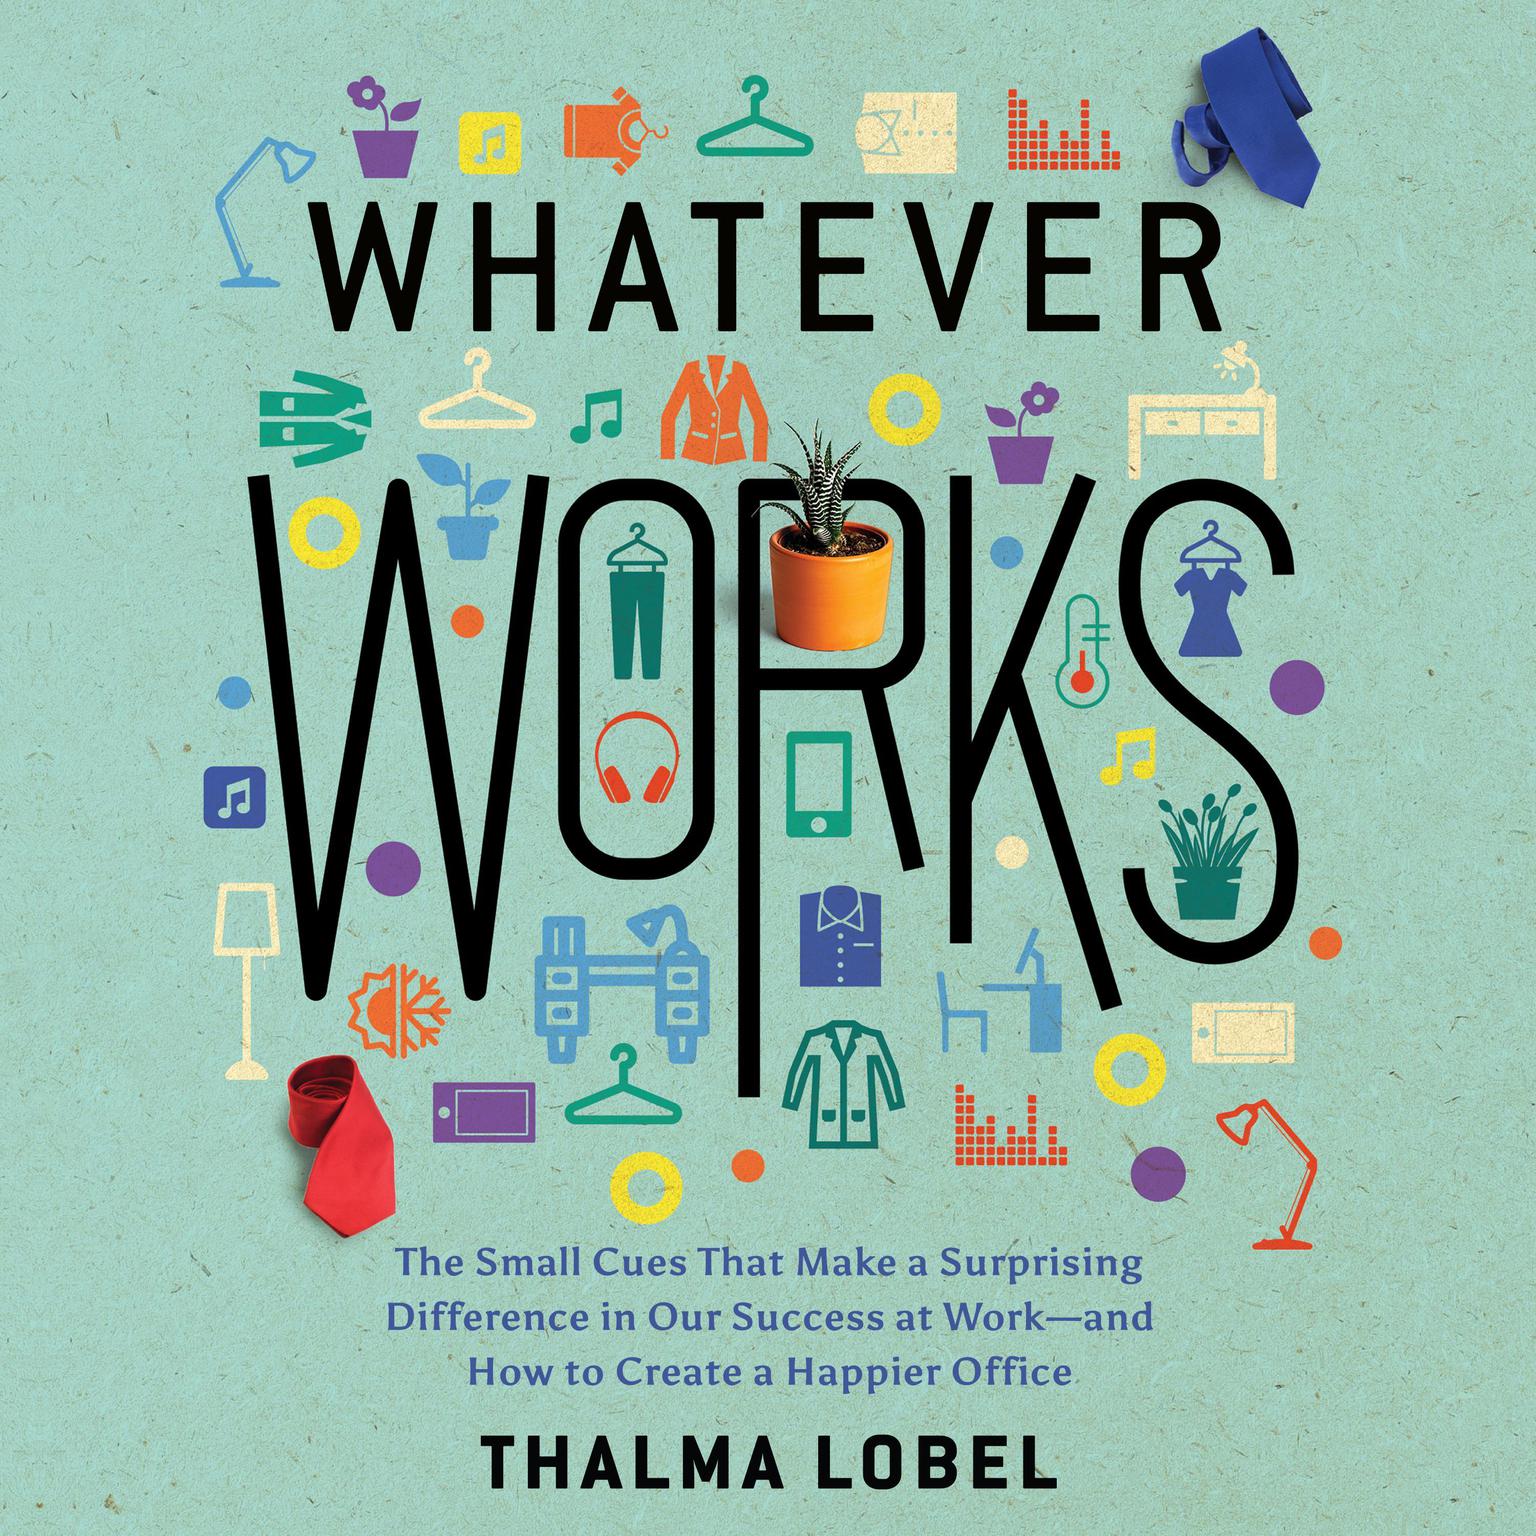 Whatever Works: The Small Cues That Make a Surprising Difference in Our Success at Work - and How to Create a Happier Office Audiobook, by Thalma Lobel